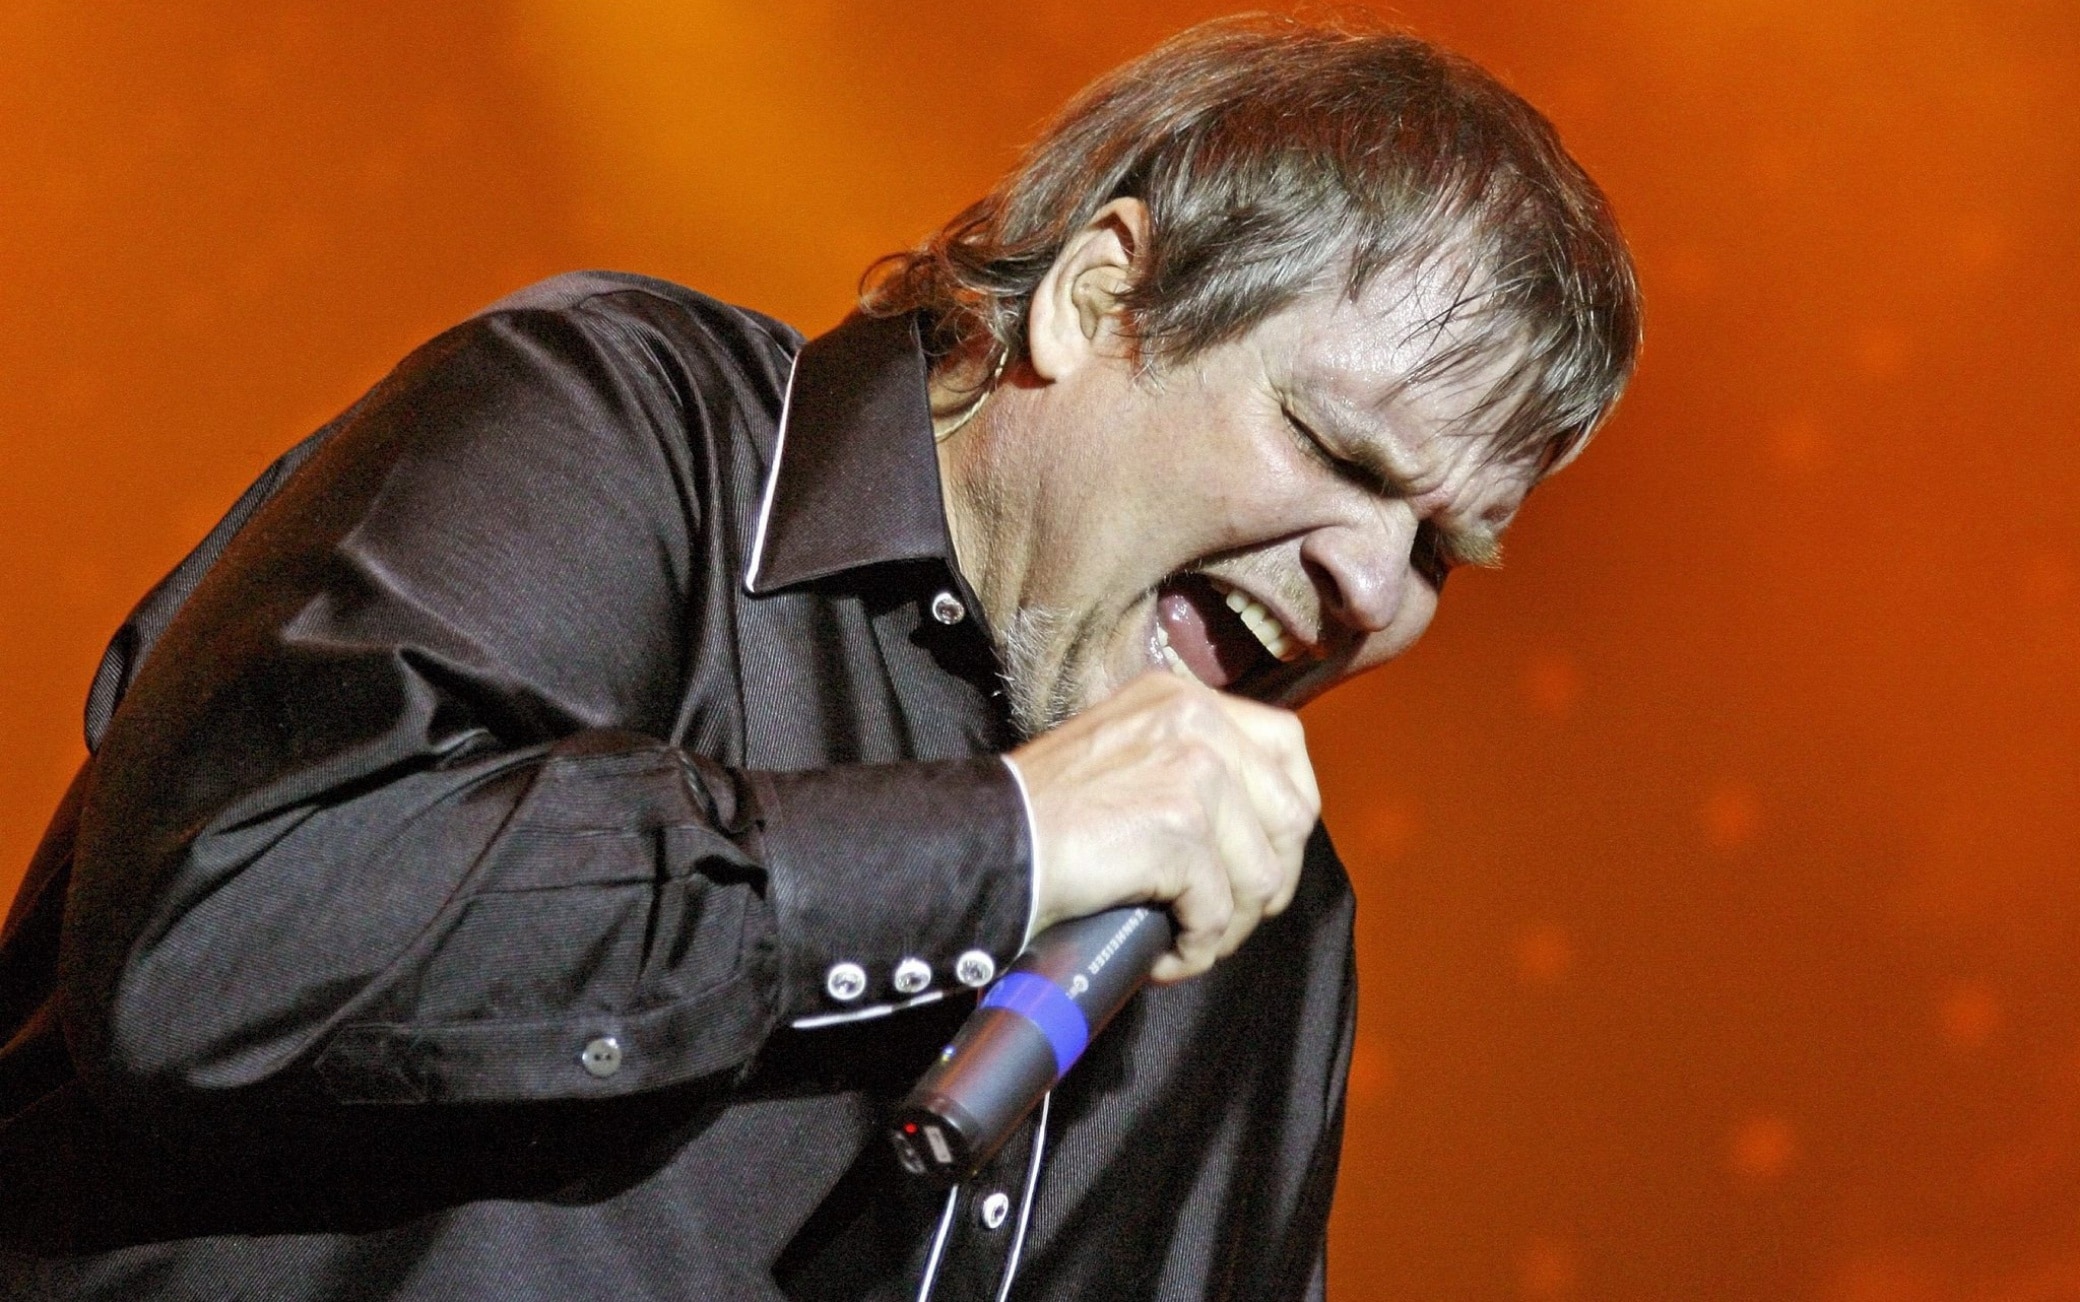 Farewell to Meat Loaf, the rock singer of “Bat Out of Hell” dies: he was 74 years old